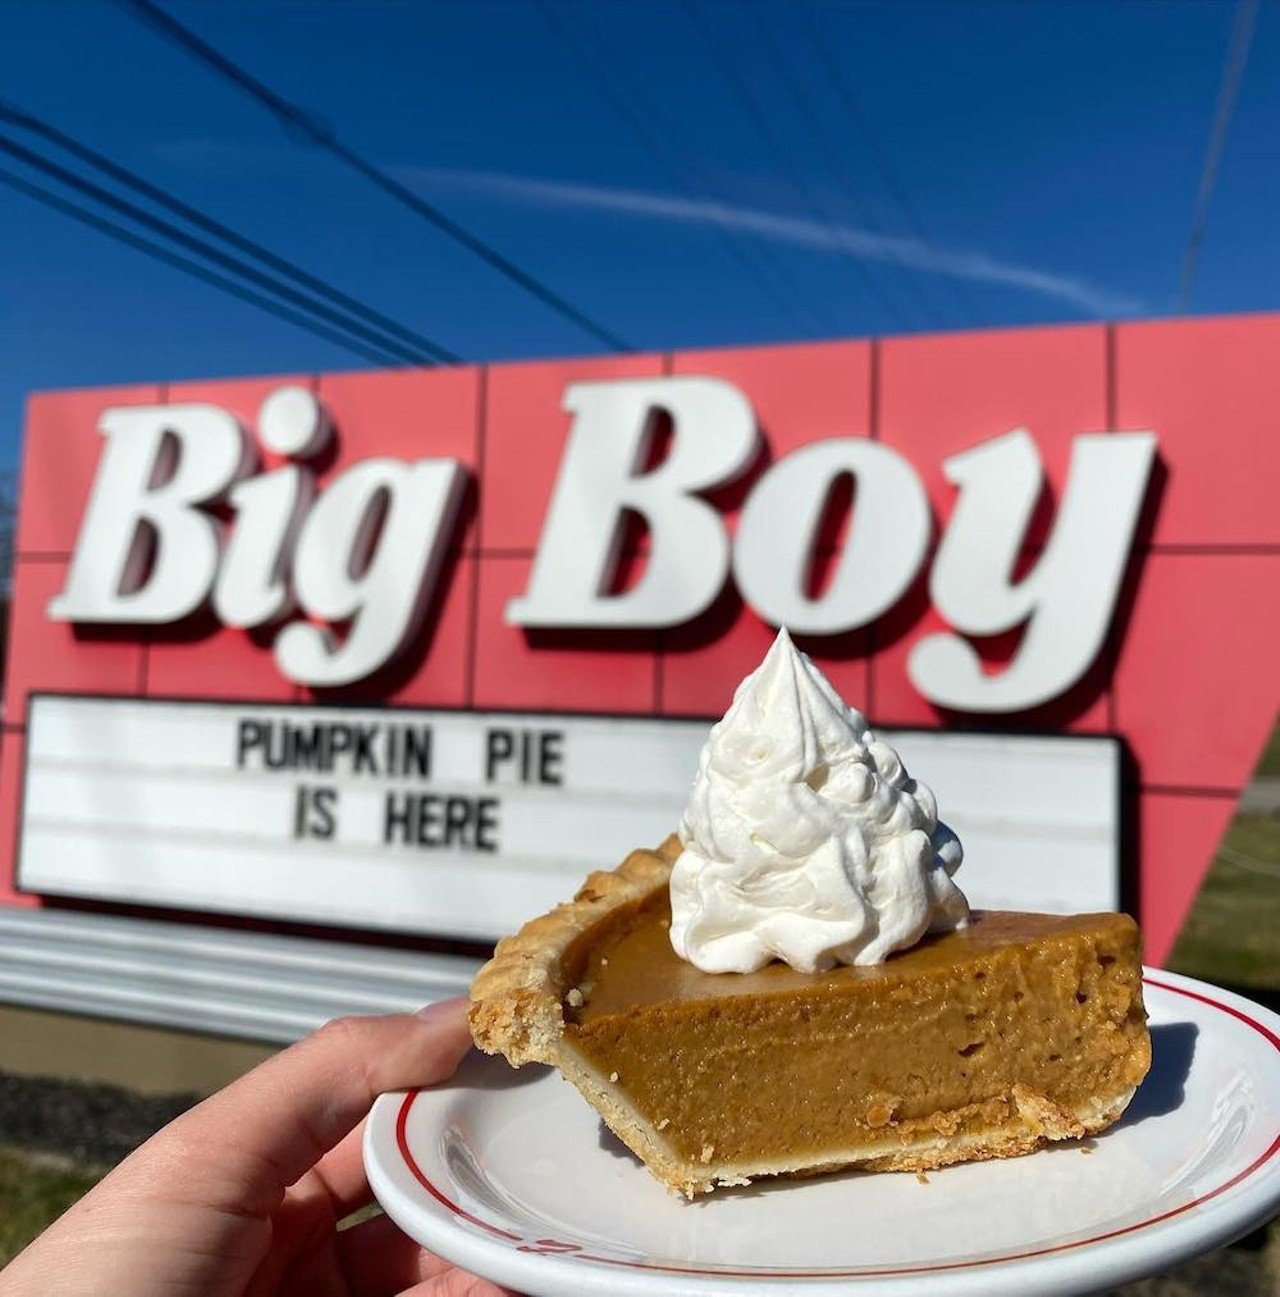 Frisch’s Big Boy
Multiple locations
Frisch’s pumpkin pie is a holiday staple in the Queen City – so much so that Frisch’s Mainliner is hosting a pre-Thanksgiving pumpkin pie eating contest with none other than Joey Chestnut. If pumpkin’s not your thing, most locations also offer whole cherry, apple, pecan and coconut cream pie.